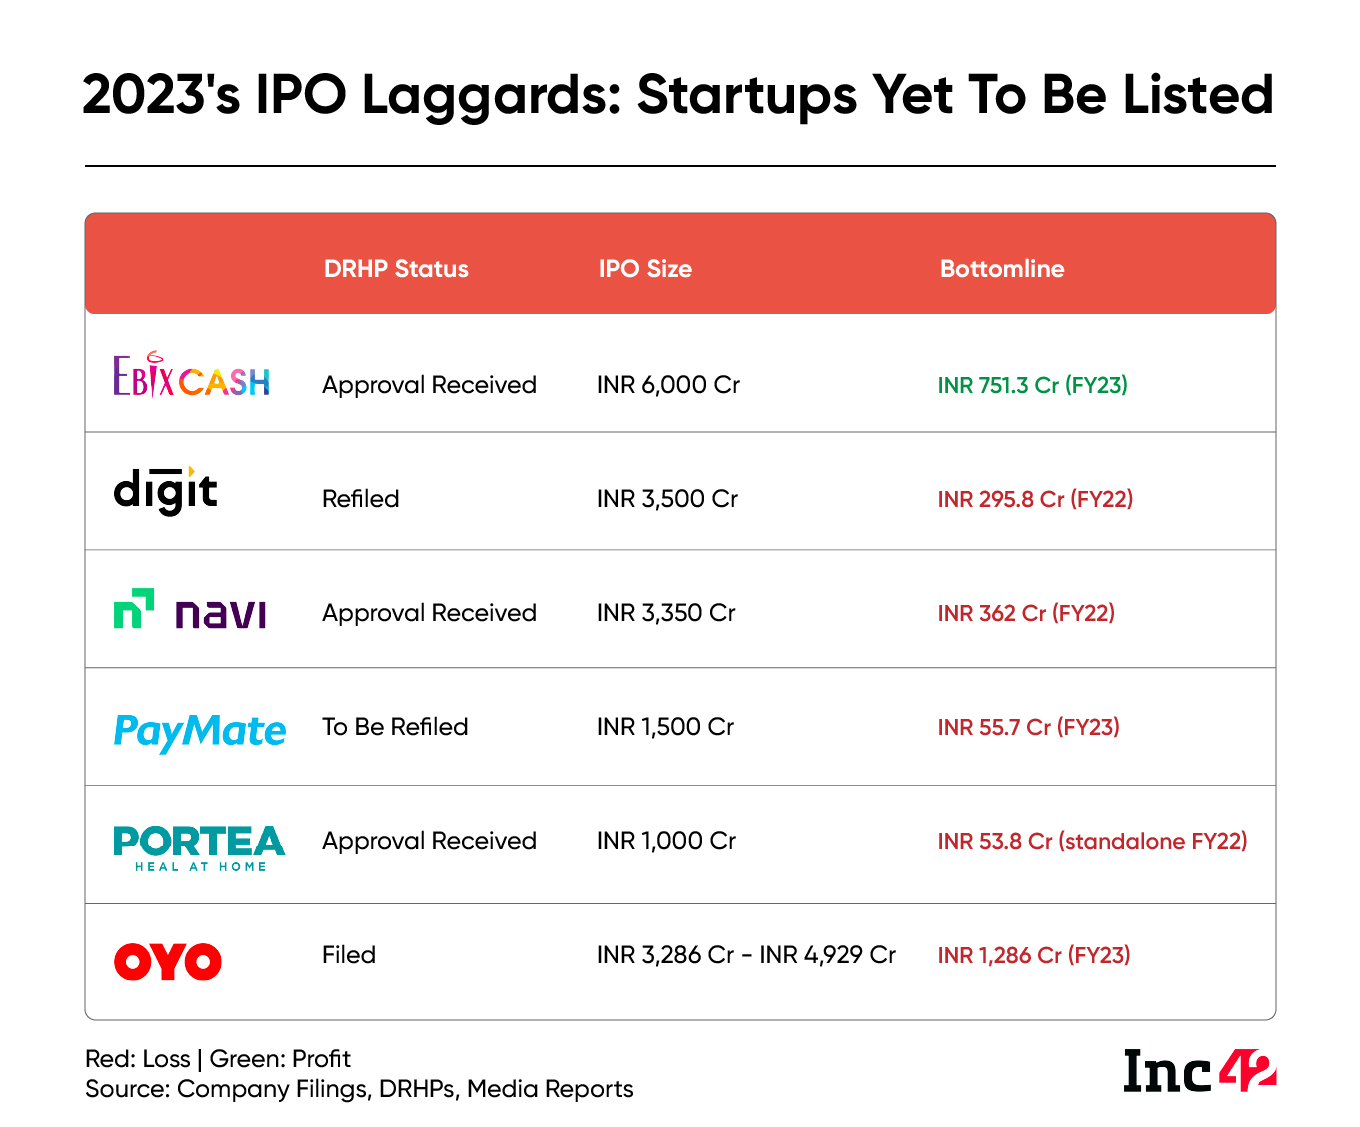 The IPO laggards